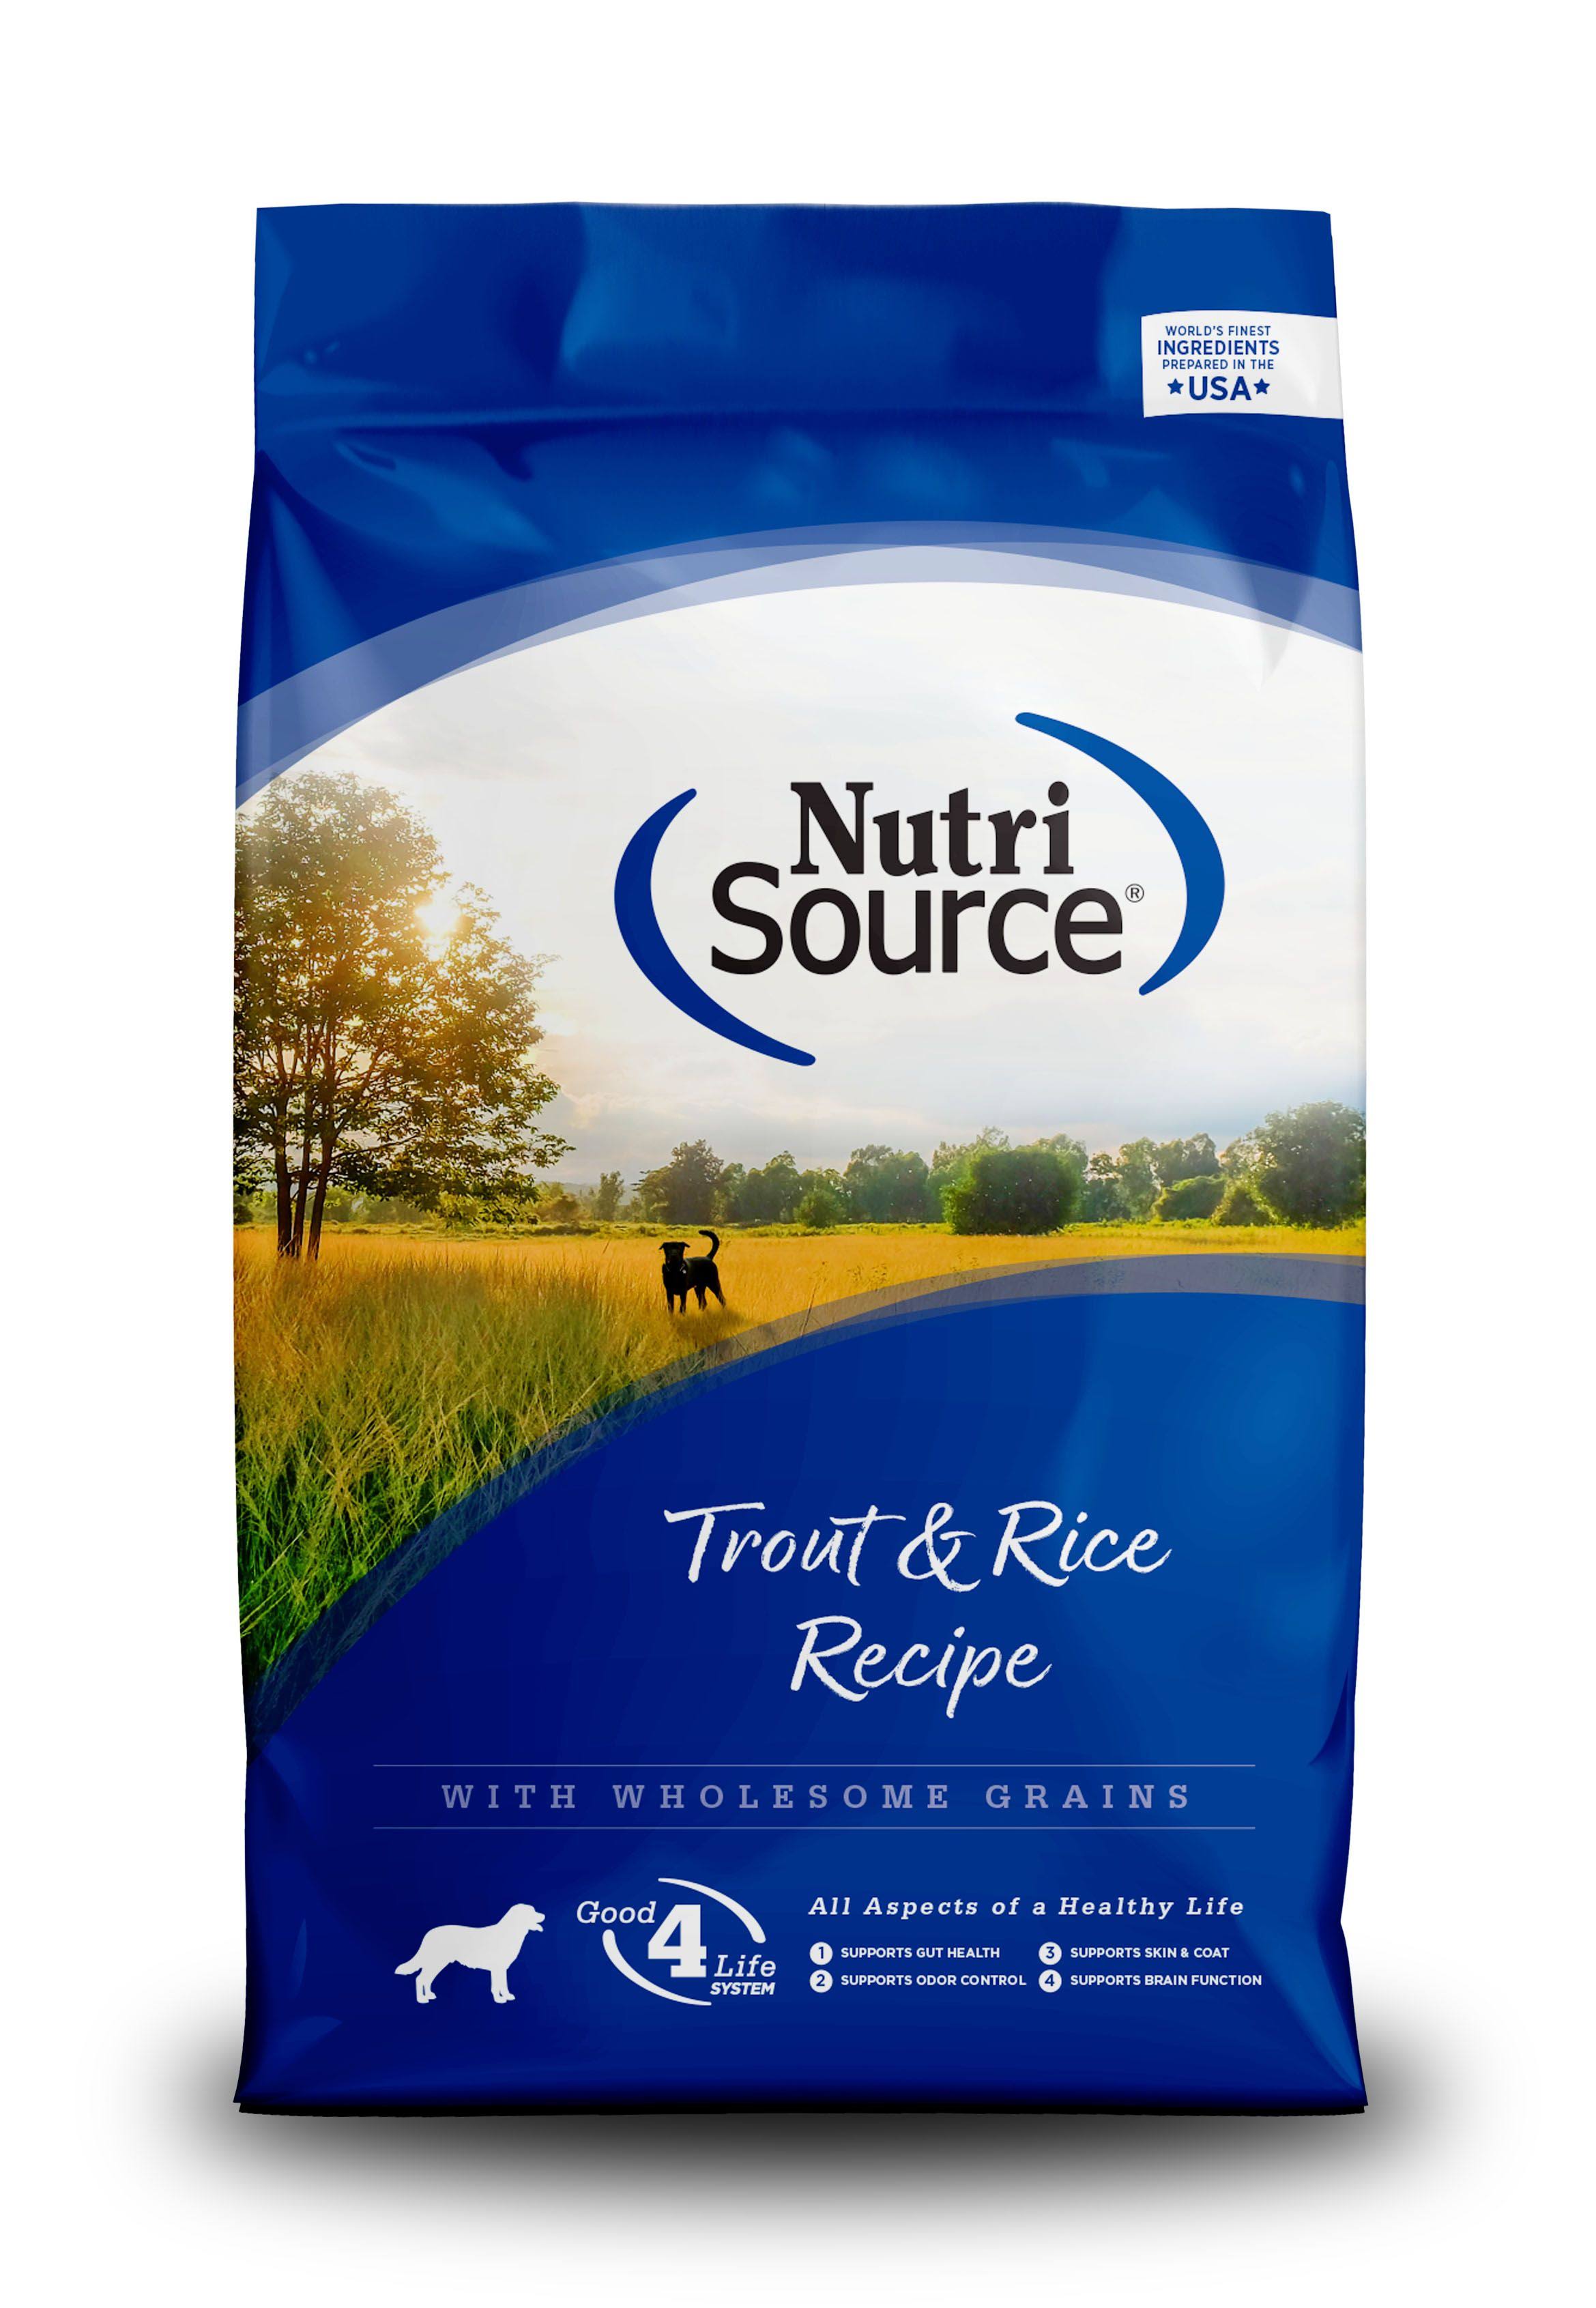 NutriSource Trout & Rice Dry Dog Food - 5 lb